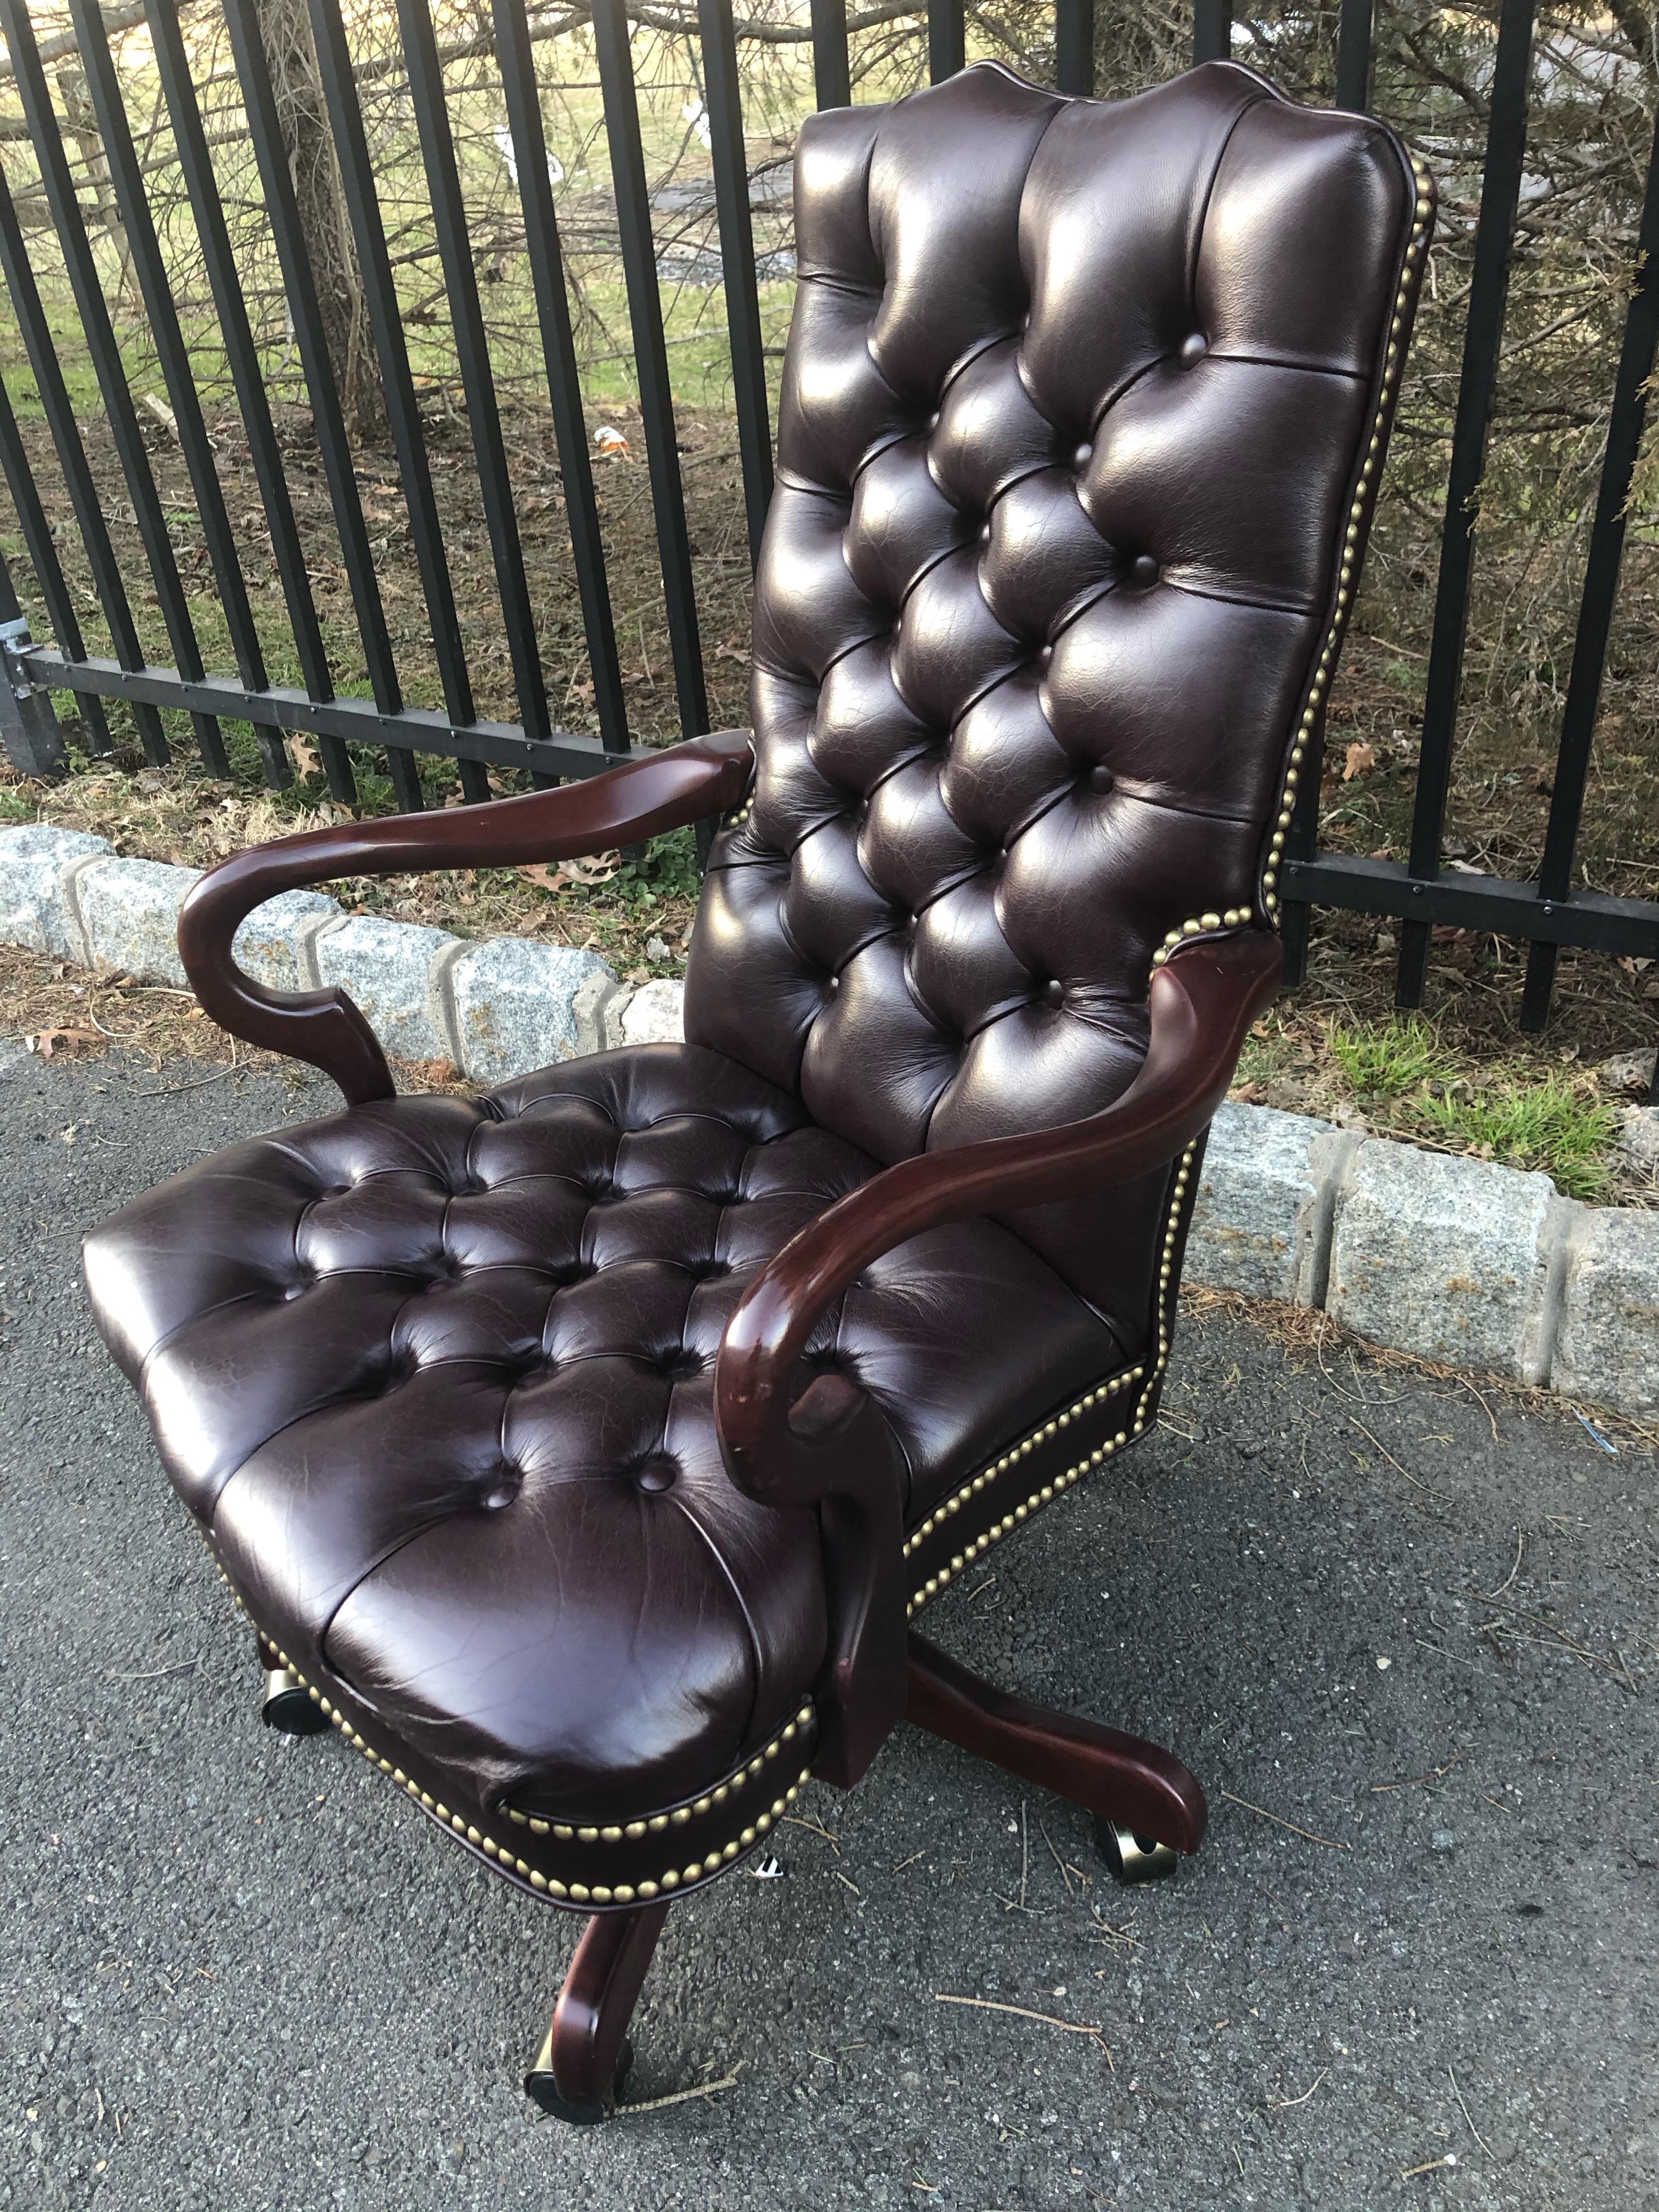 Luscious brown leather tufted desk chair with scroll wooden arms and nailhead trim. Chair is on casters and seat tilts and swivels. Color is a very dark burgundy which can pass for almost chocolate brown.